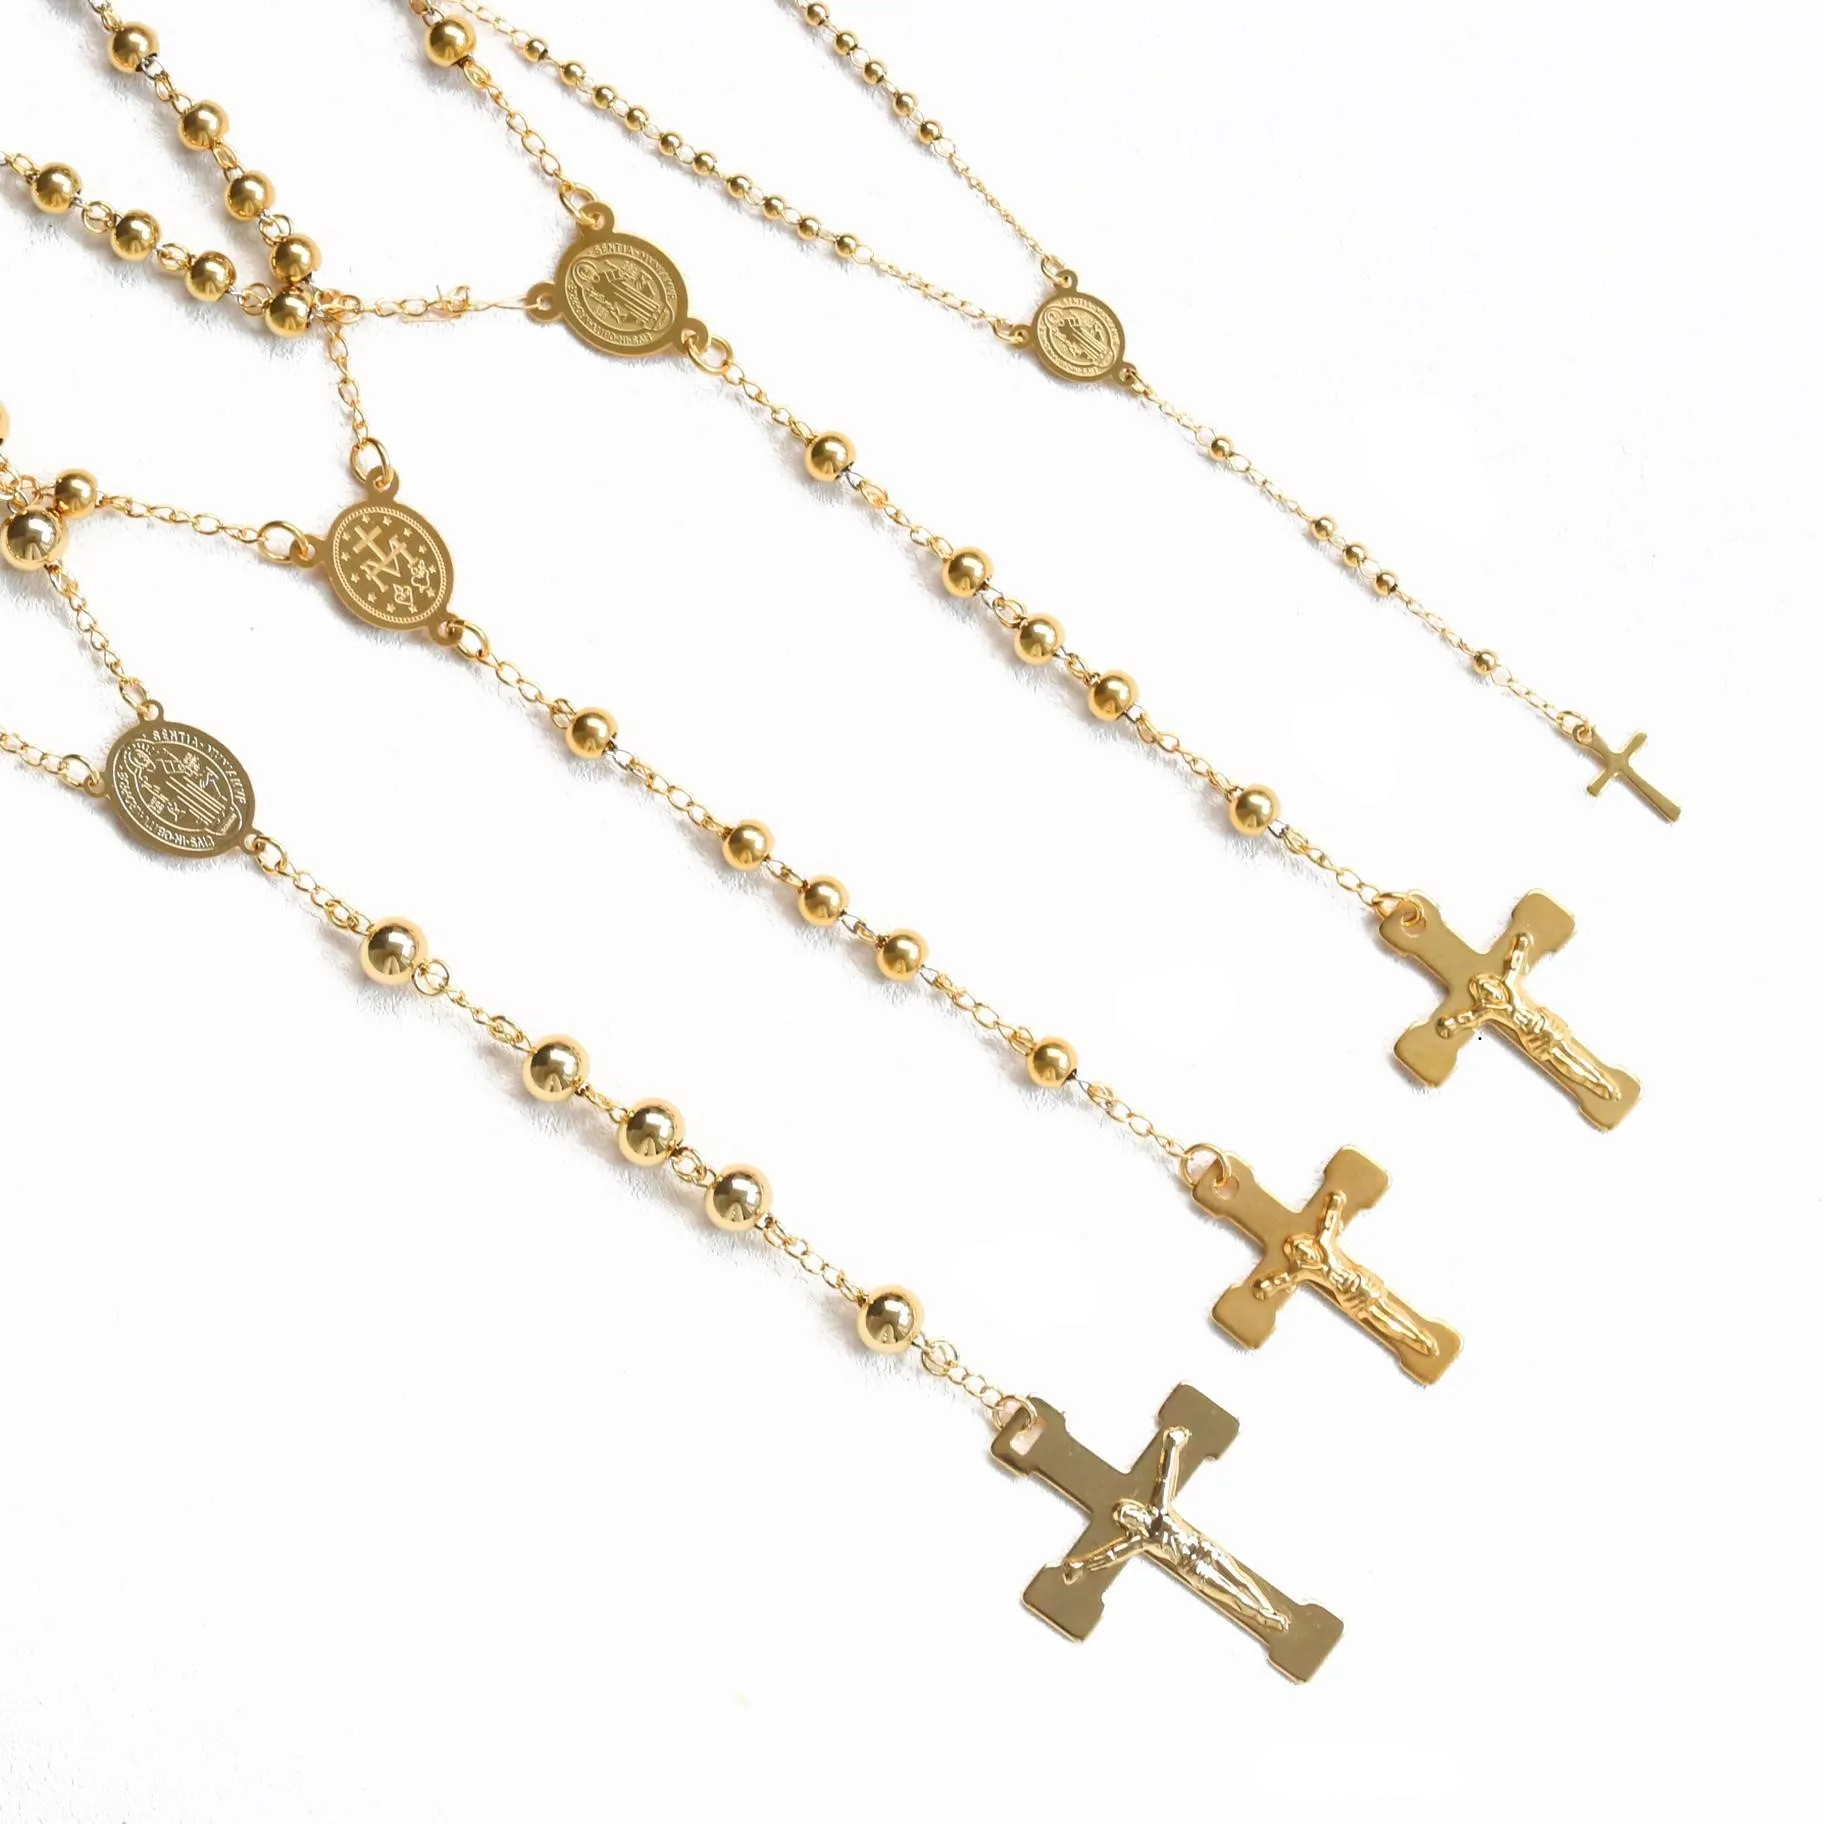 

New Gold Rosary Bead Y Necklace Religious Jewelry Catholic 14K 18K 22K 24K Gold Plated Chain Jesus Cross Pendant Rosary Necklace, Golden